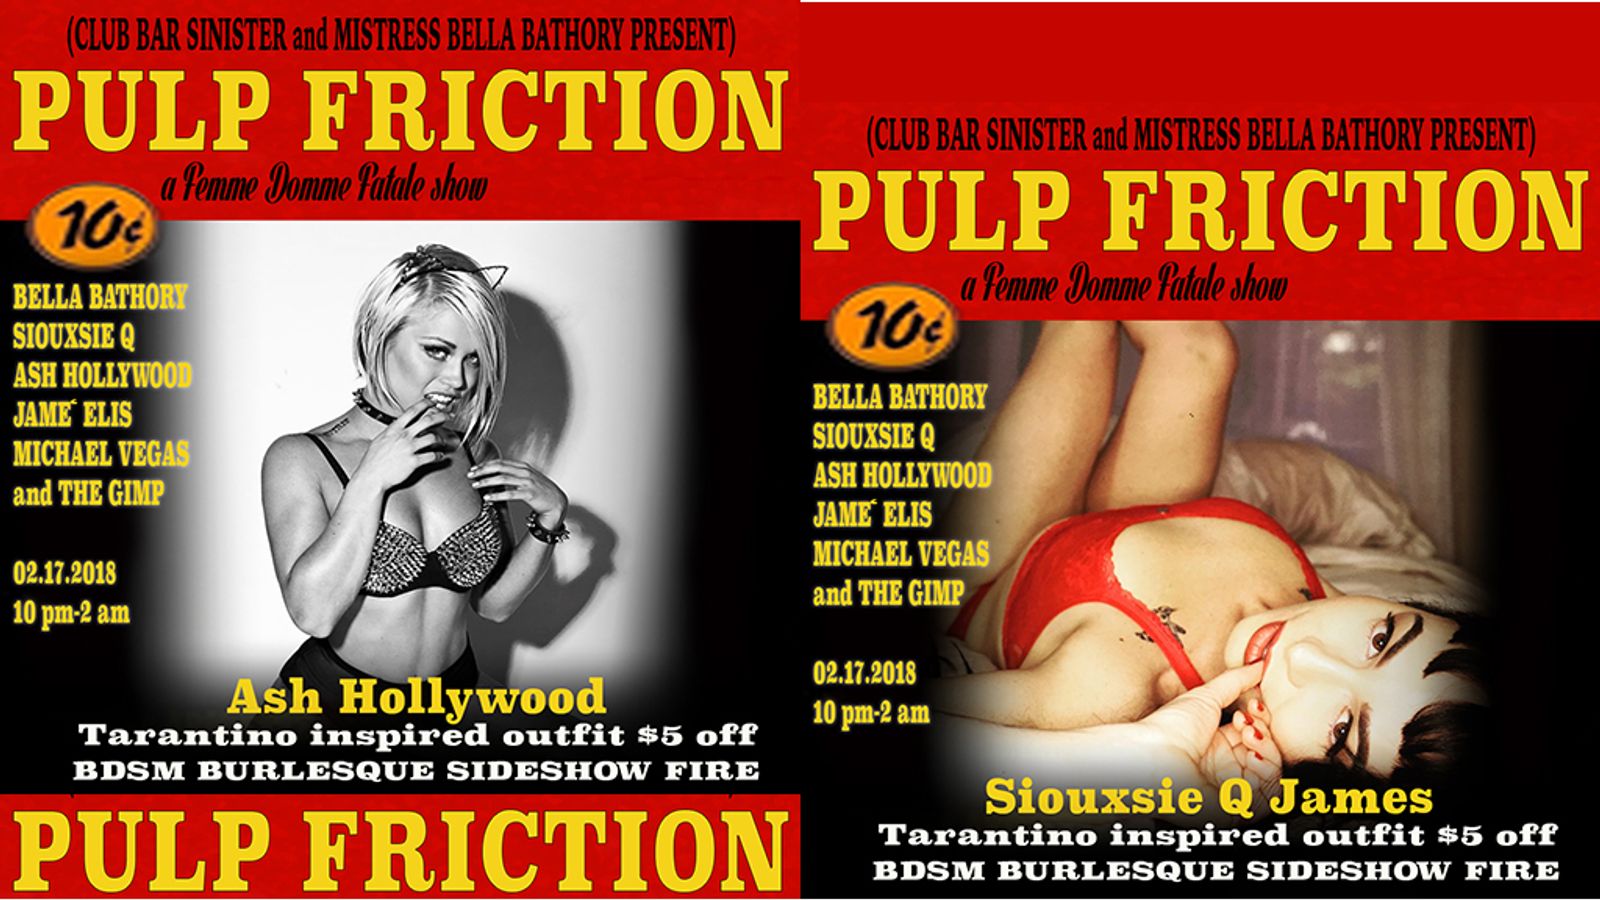 Siouxsie Q Talks Women's Safety On 'Pulp Friction' This Saturday